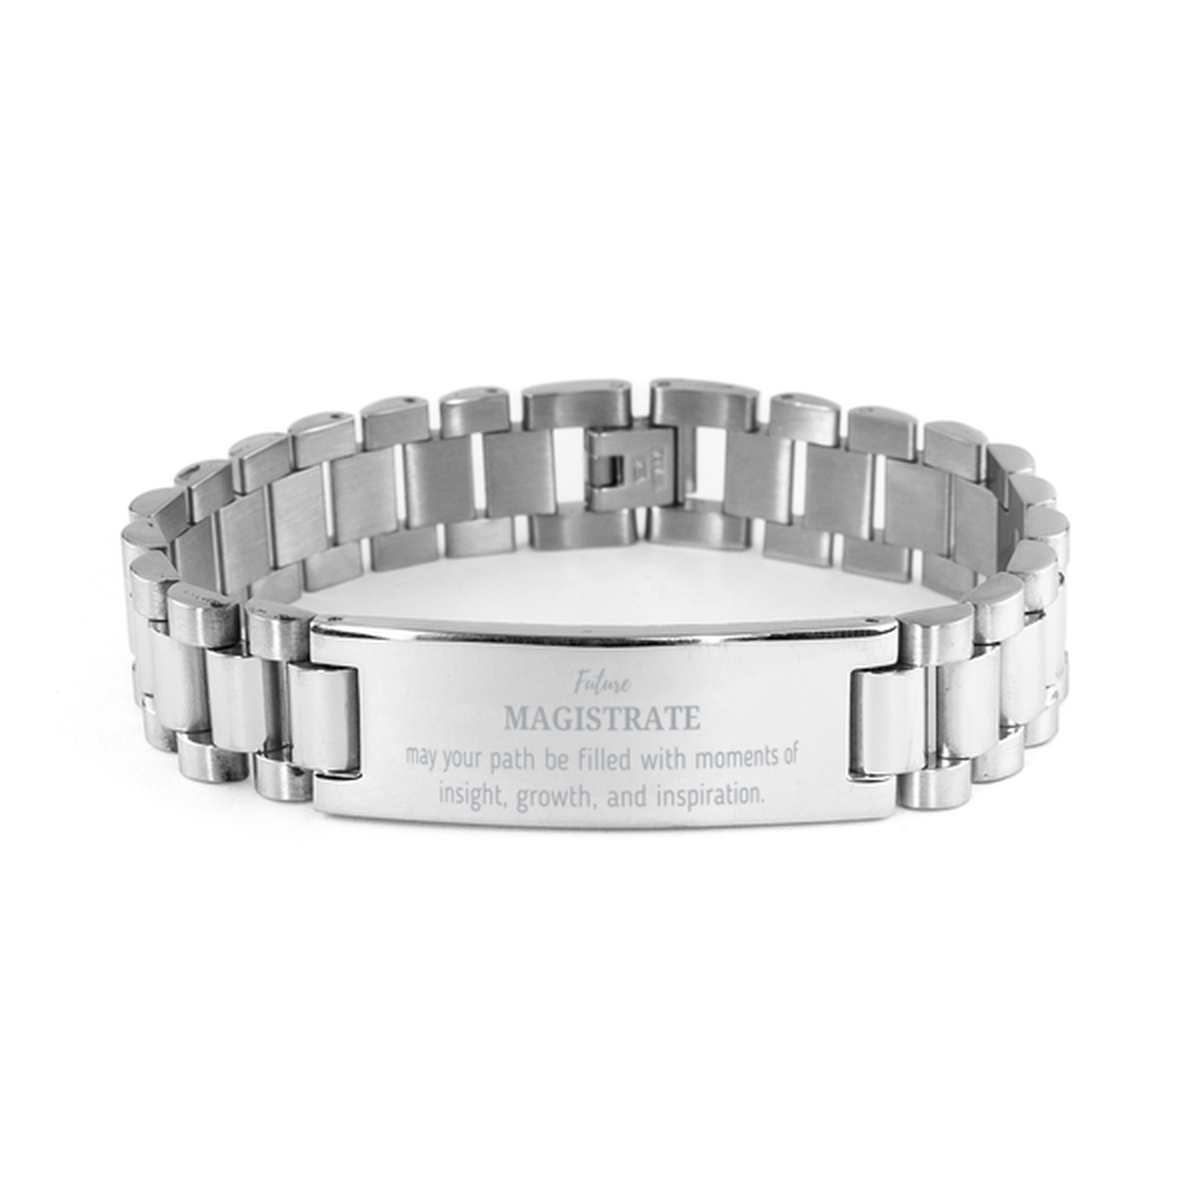 Future Magistrate Gifts, May your path be filled with moments of insight, Graduation Gifts for New Magistrate, Christmas Unique Ladder Stainless Steel Bracelet For Men, Women, Friends